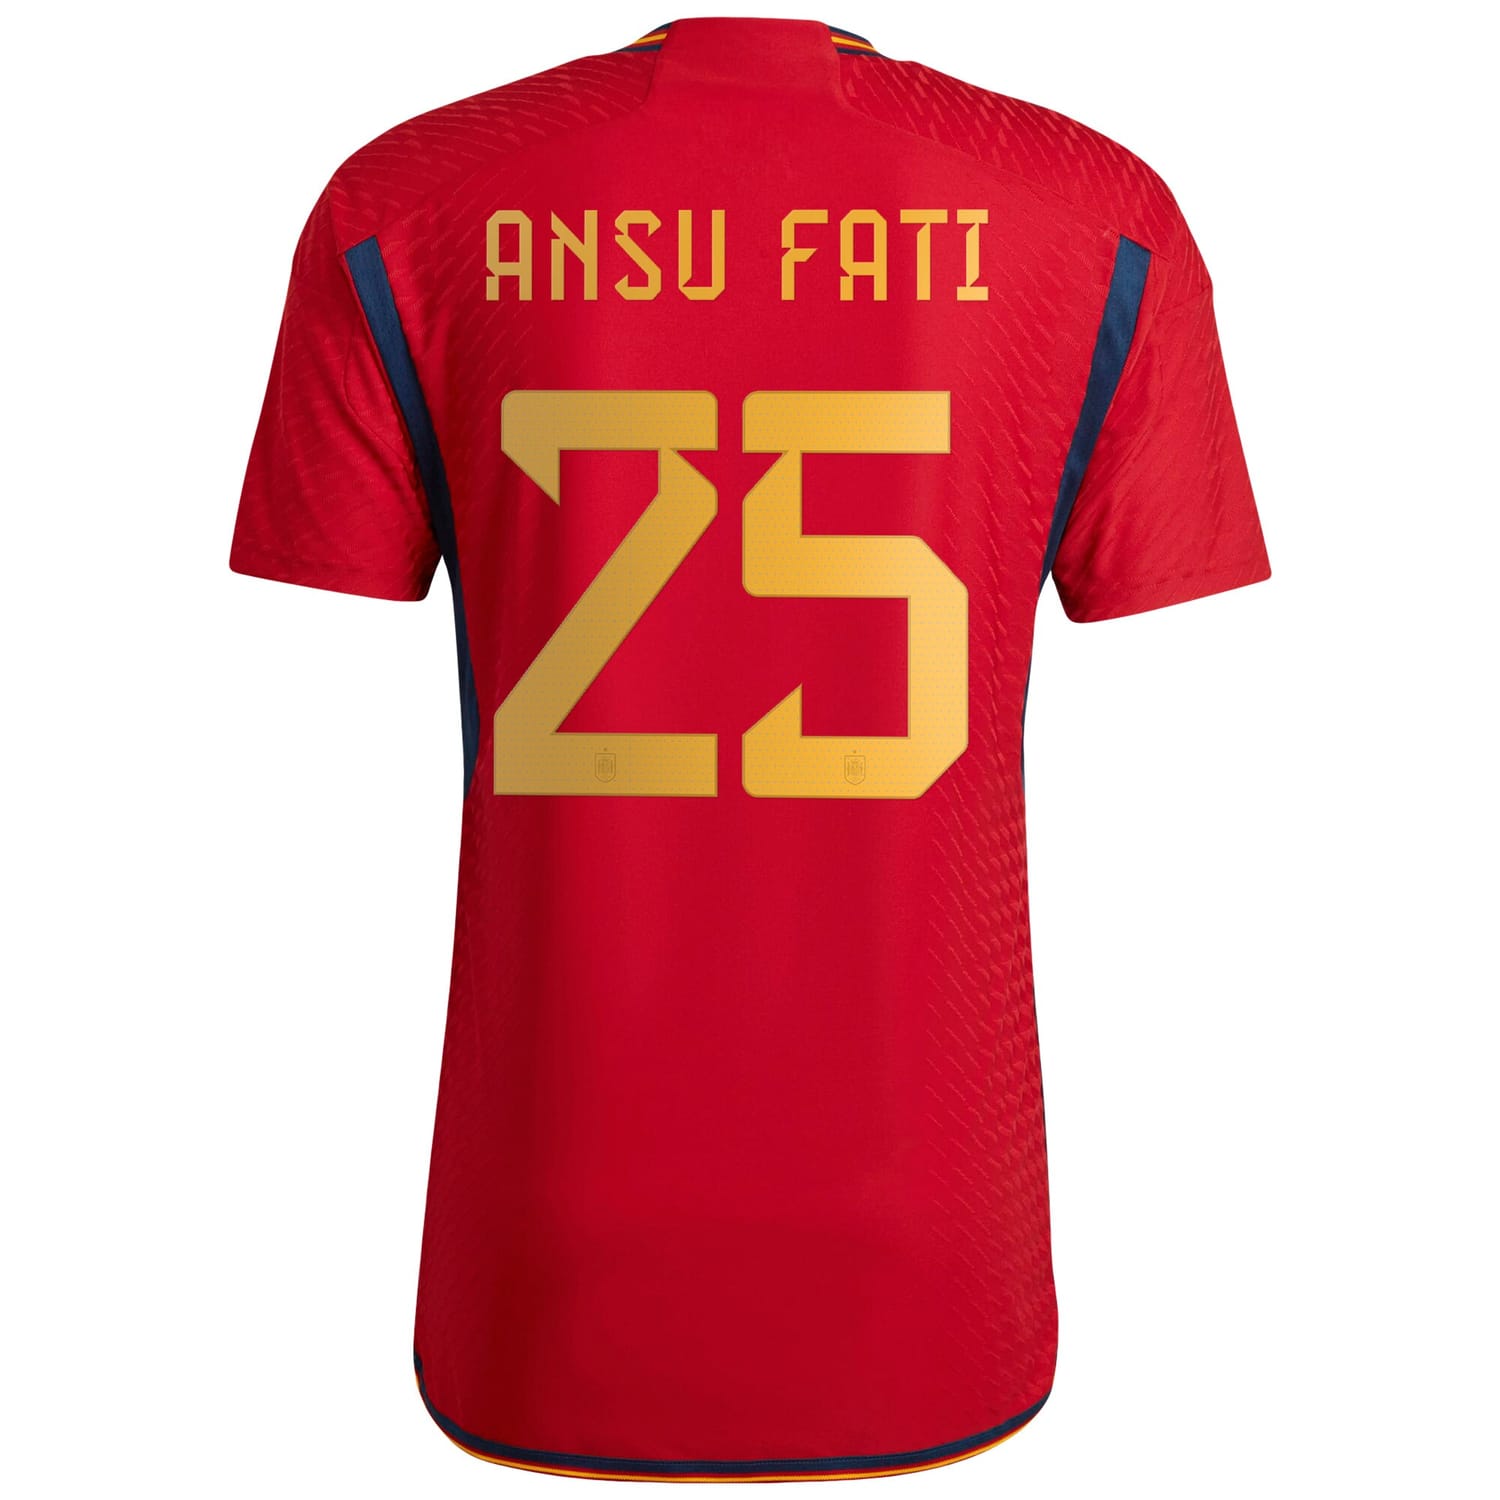 Spain National Team Home Authentic Jersey Shirt Red 2022-23 player Ansu Fati printing for Men